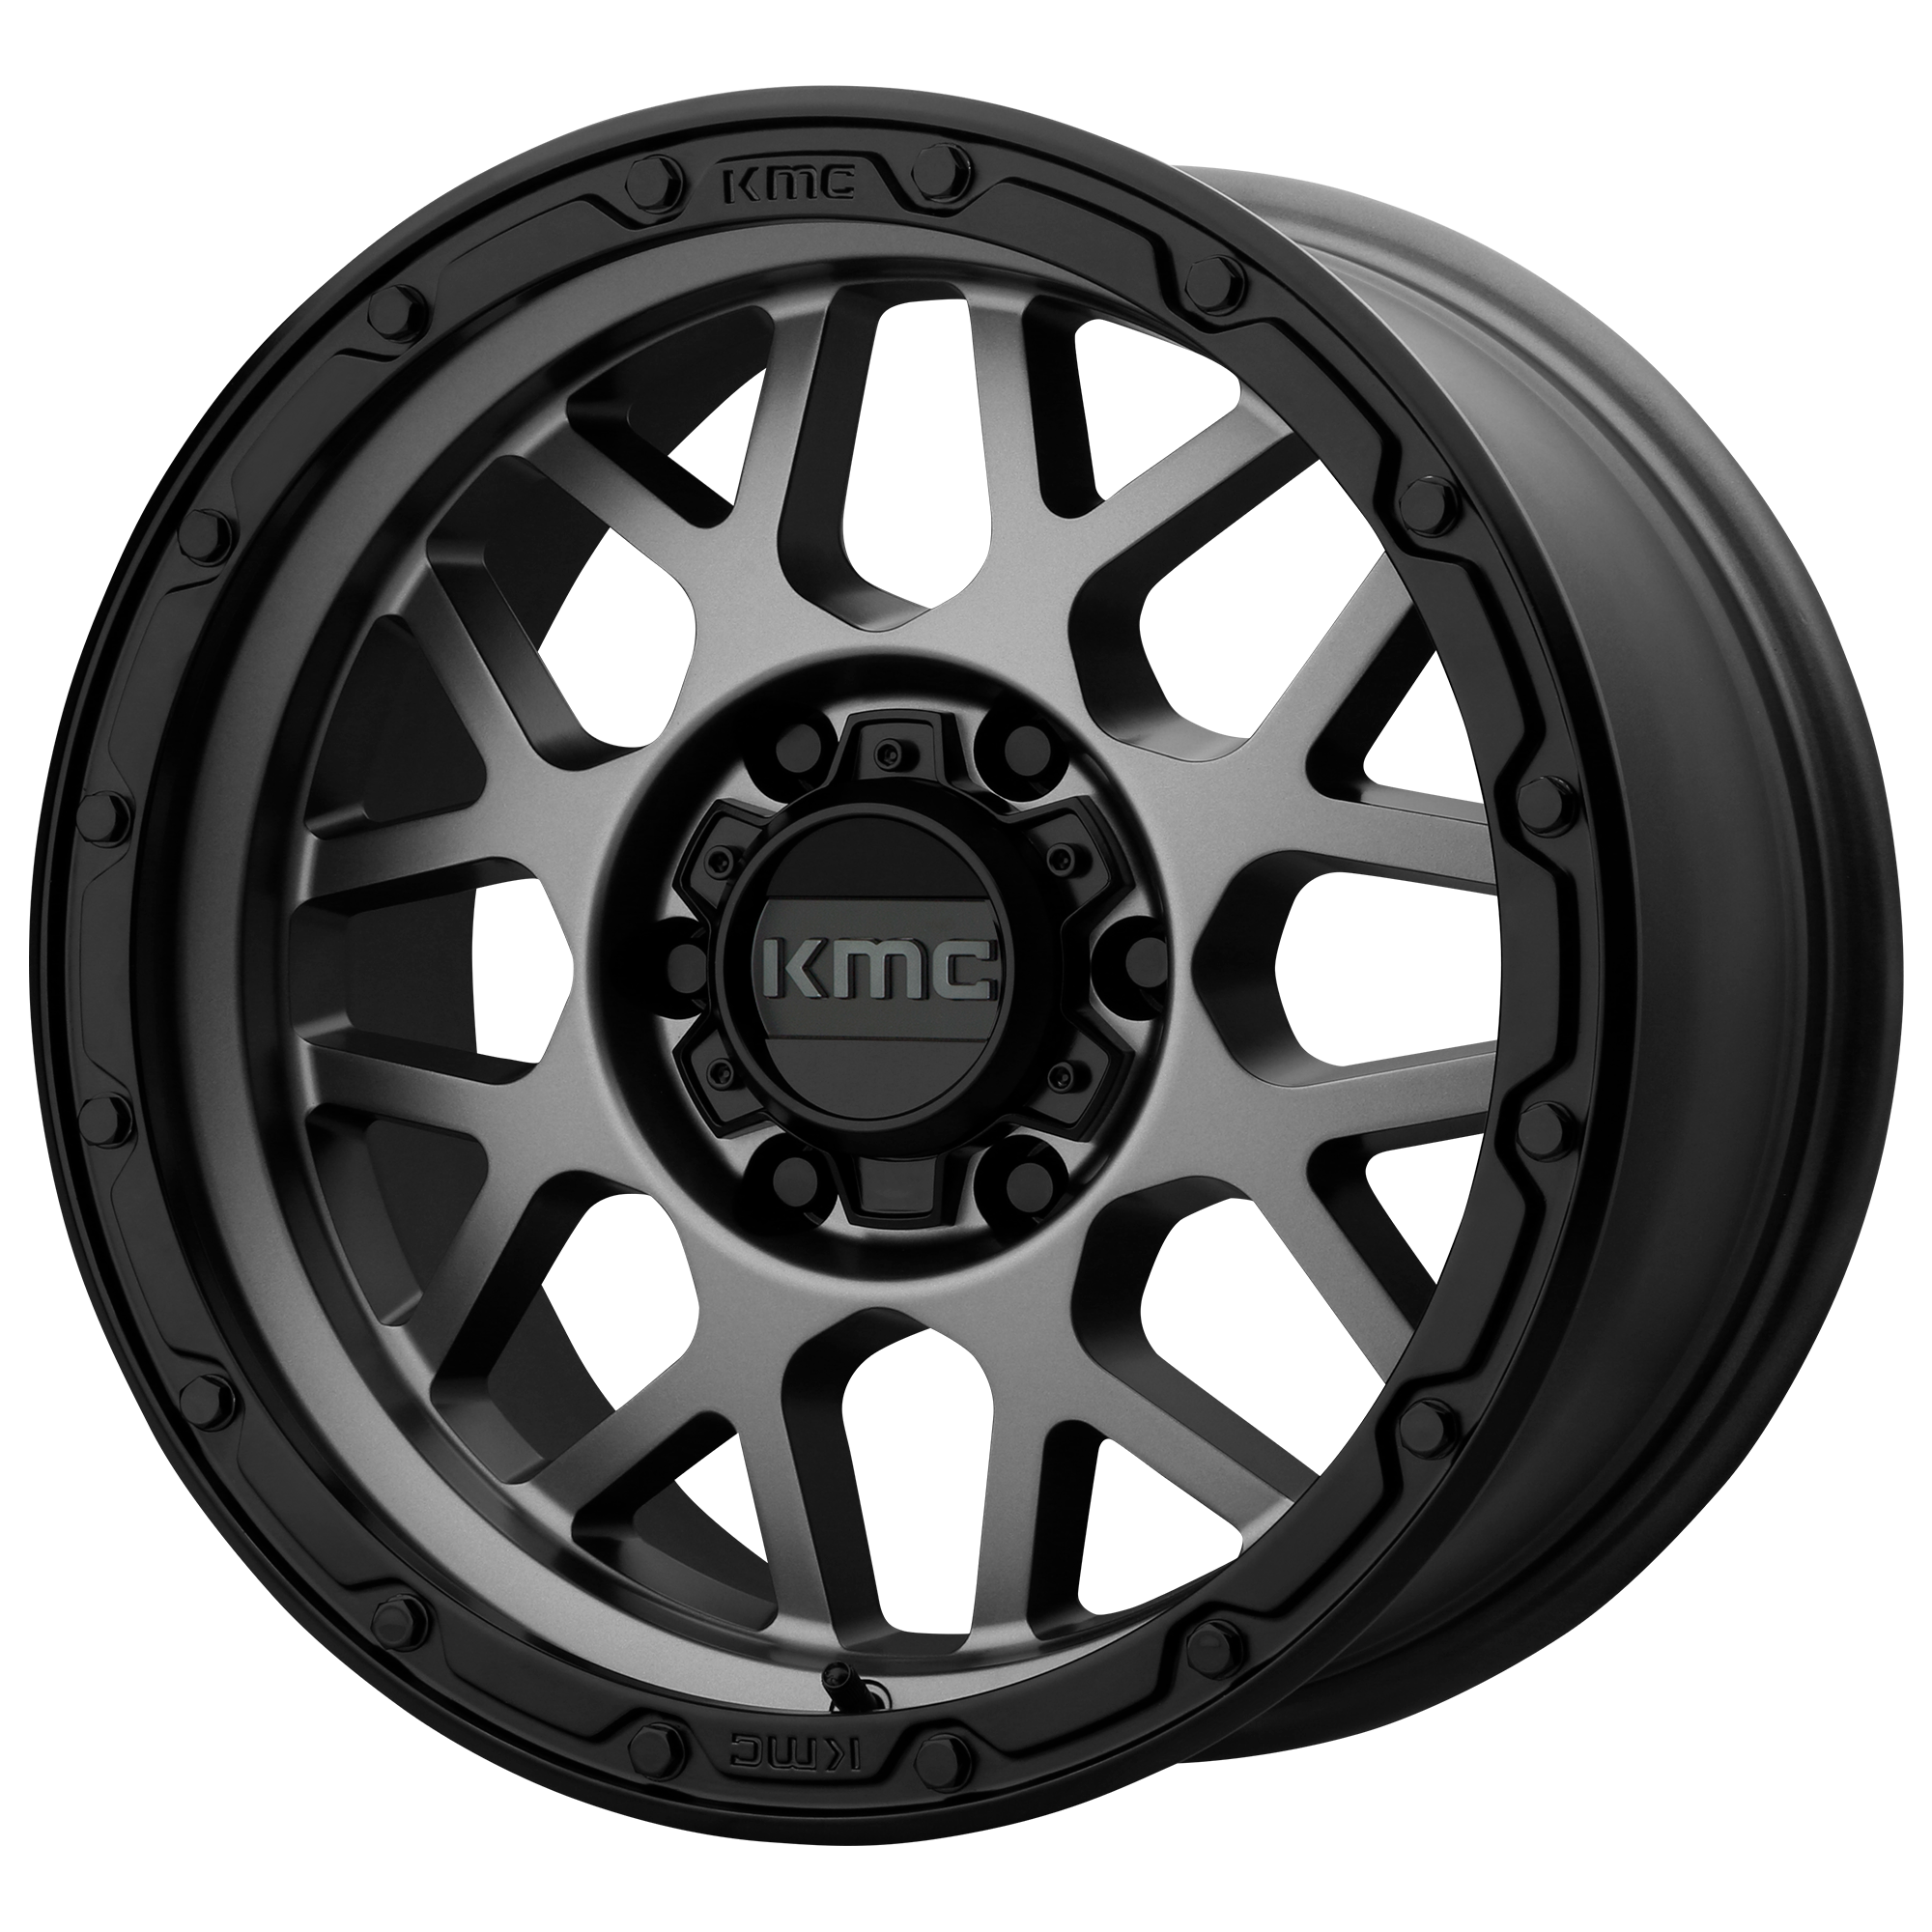 GRENADE OFF-ROAD 17x8.5 5x127.00 MATTE GRAY W/ MATTE BLACK LIP (0 mm) - Tires and Engine Performance